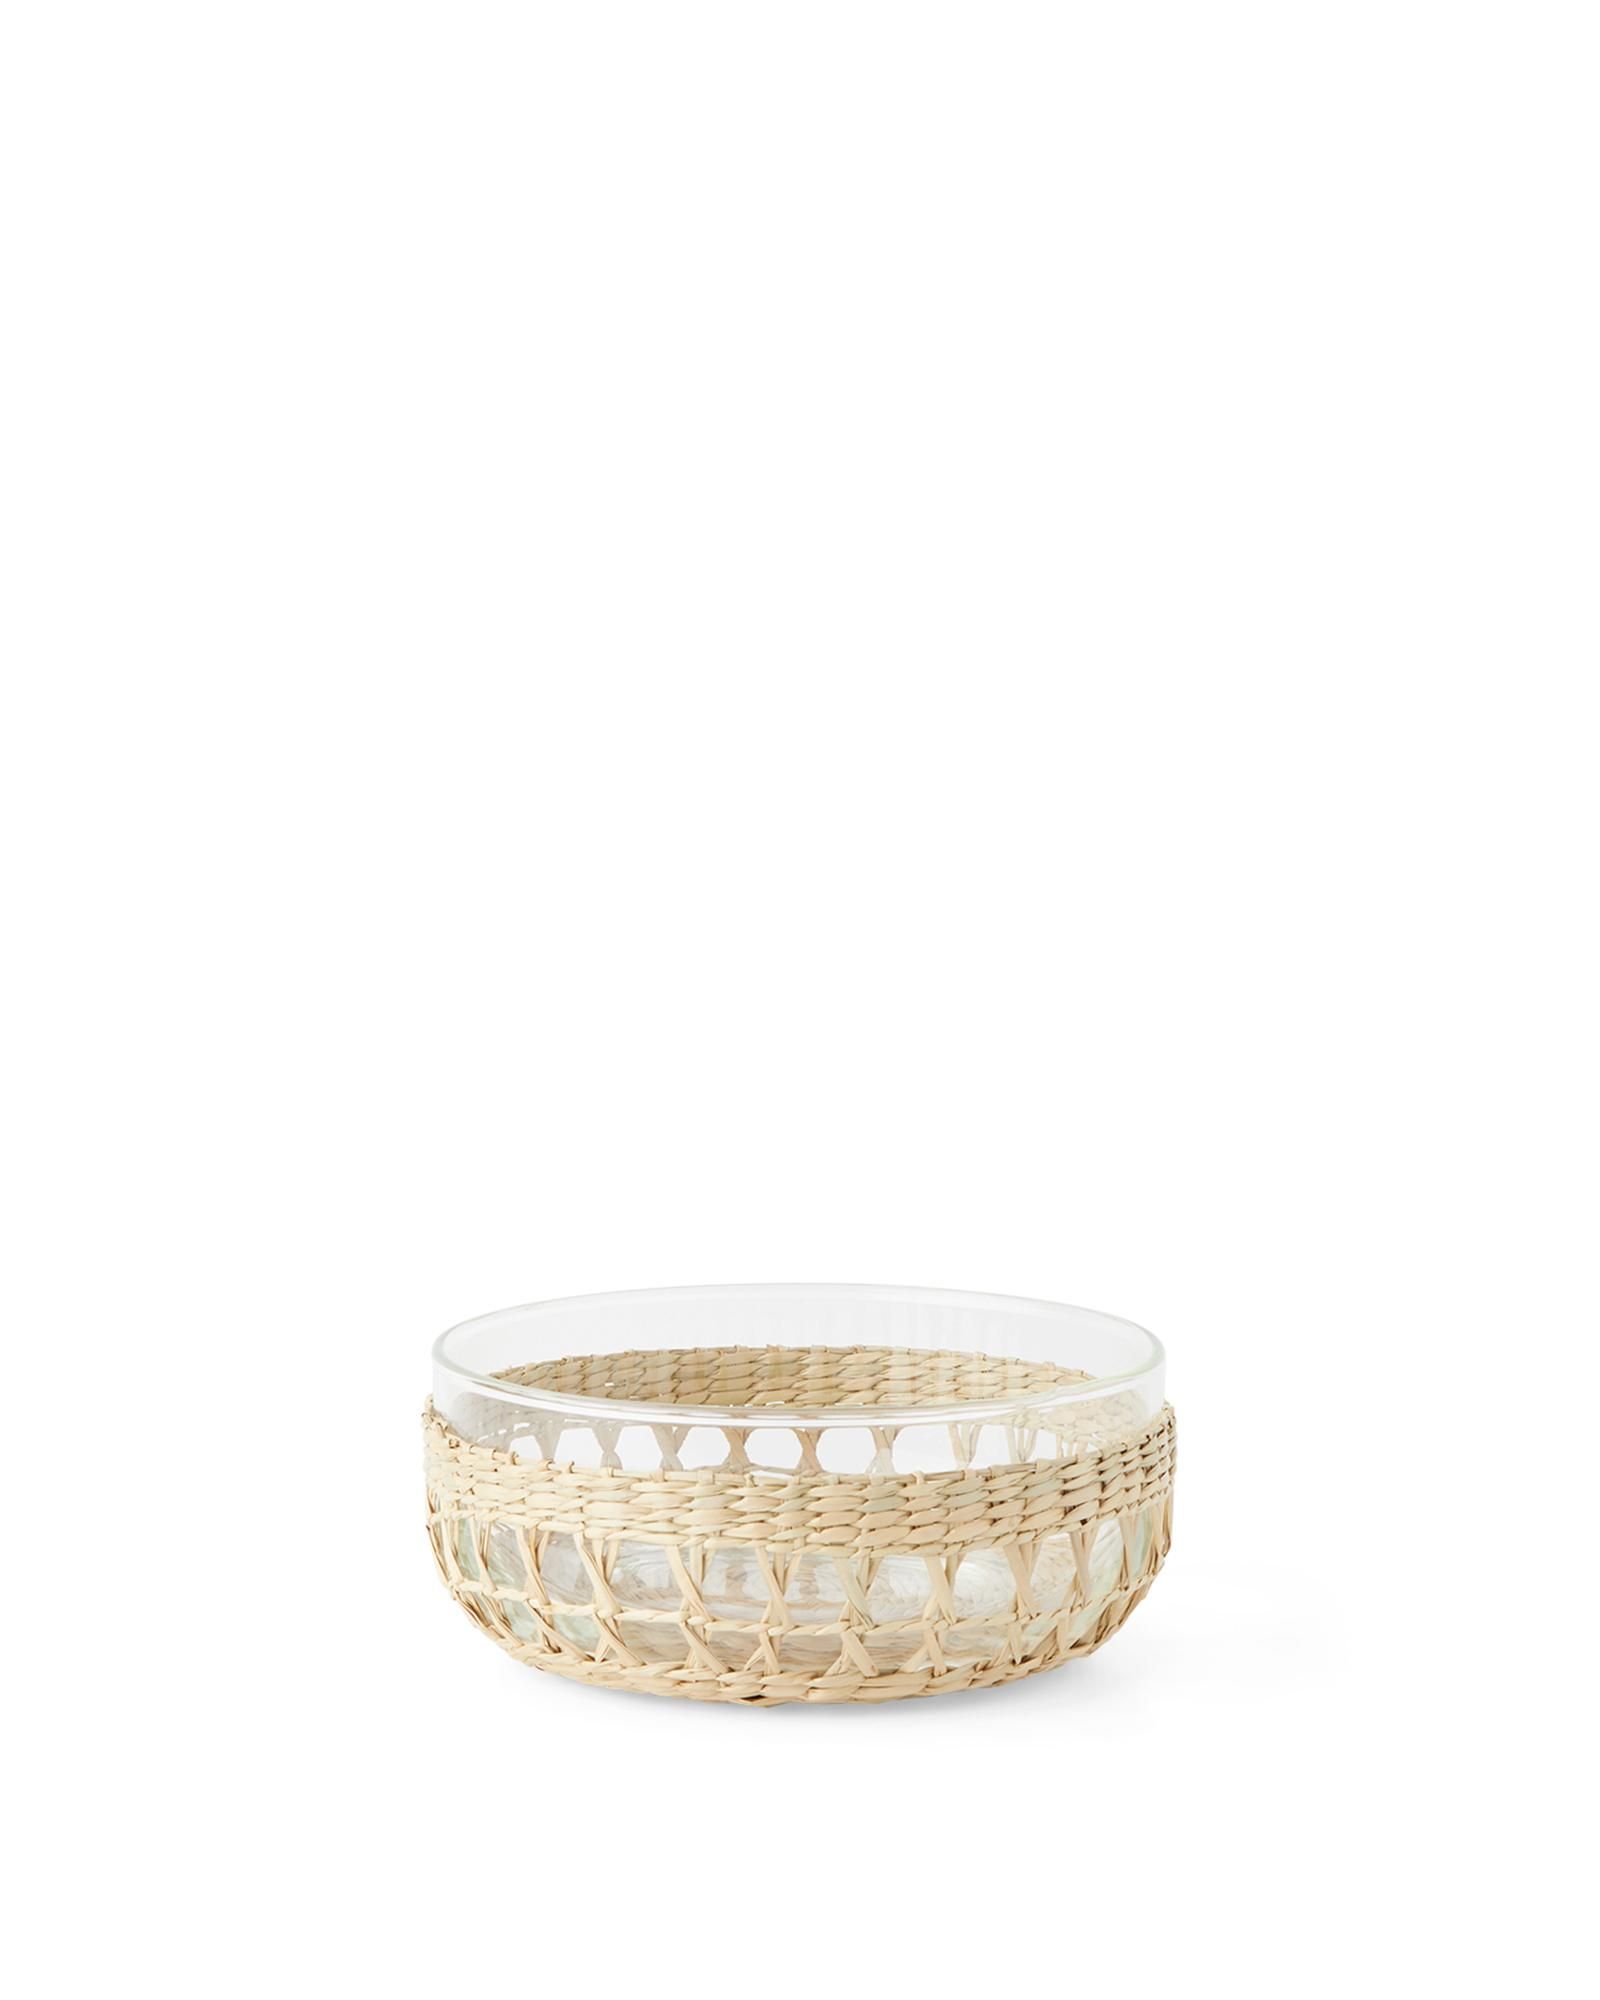 Cayman Seagrass Bowls | Serena and Lily